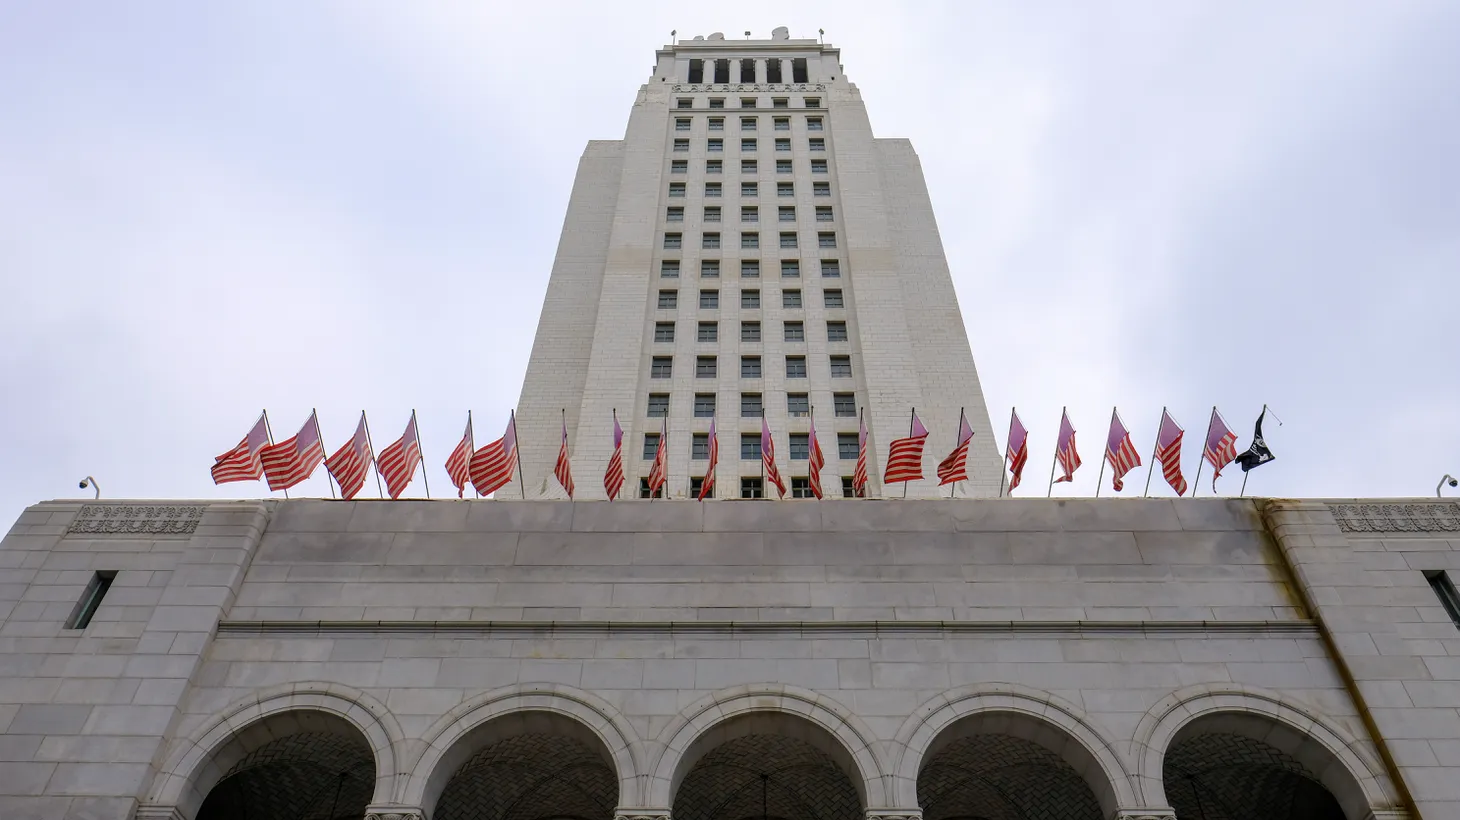 LA City Hall is seen on a cloudy day, October 14, 2022.